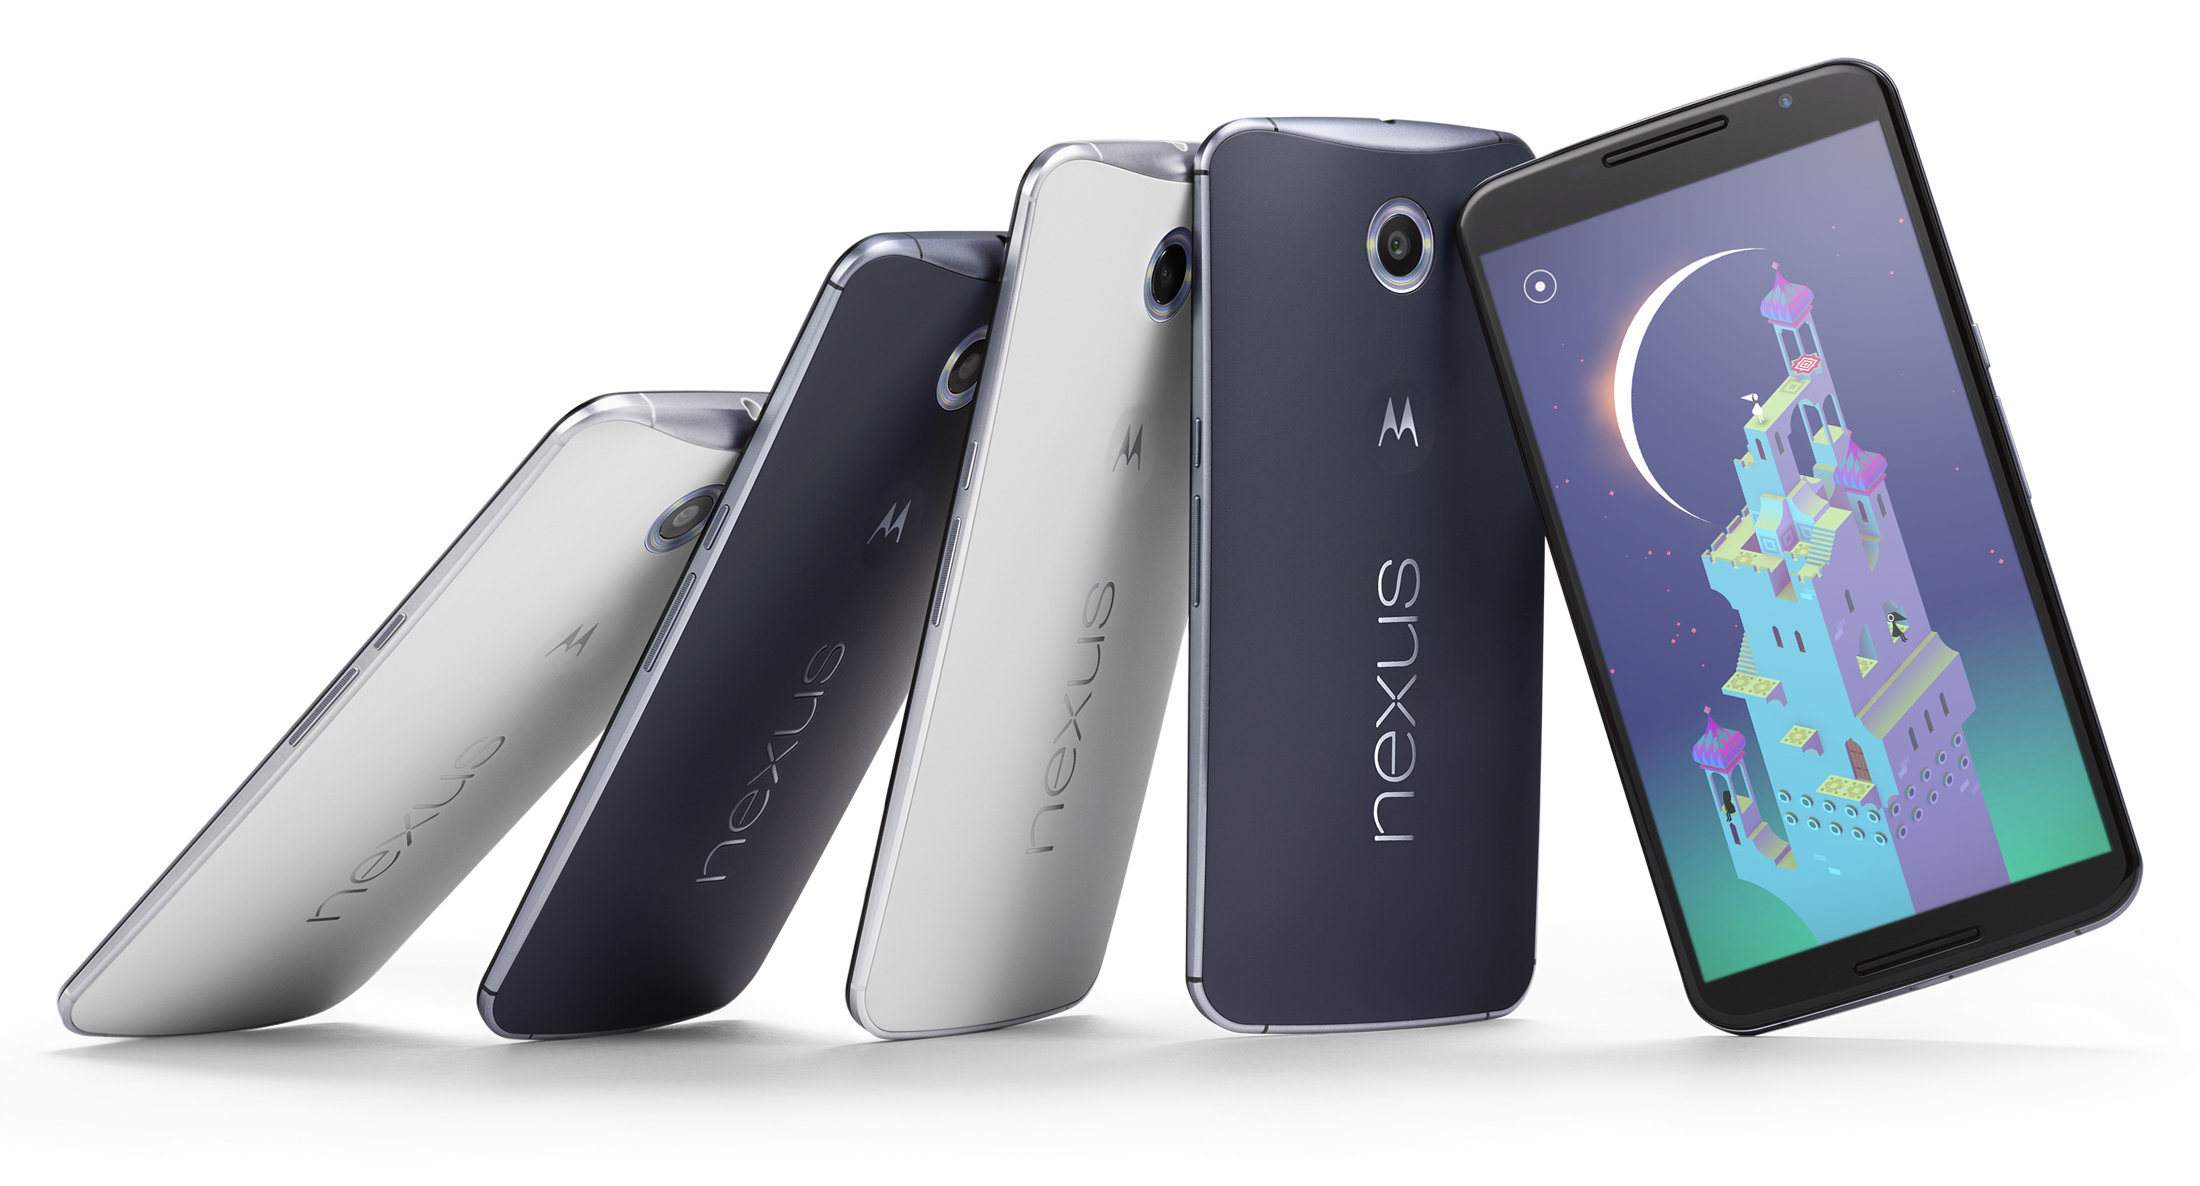 Nexus 6 - for some reason we don't have an alt tag here